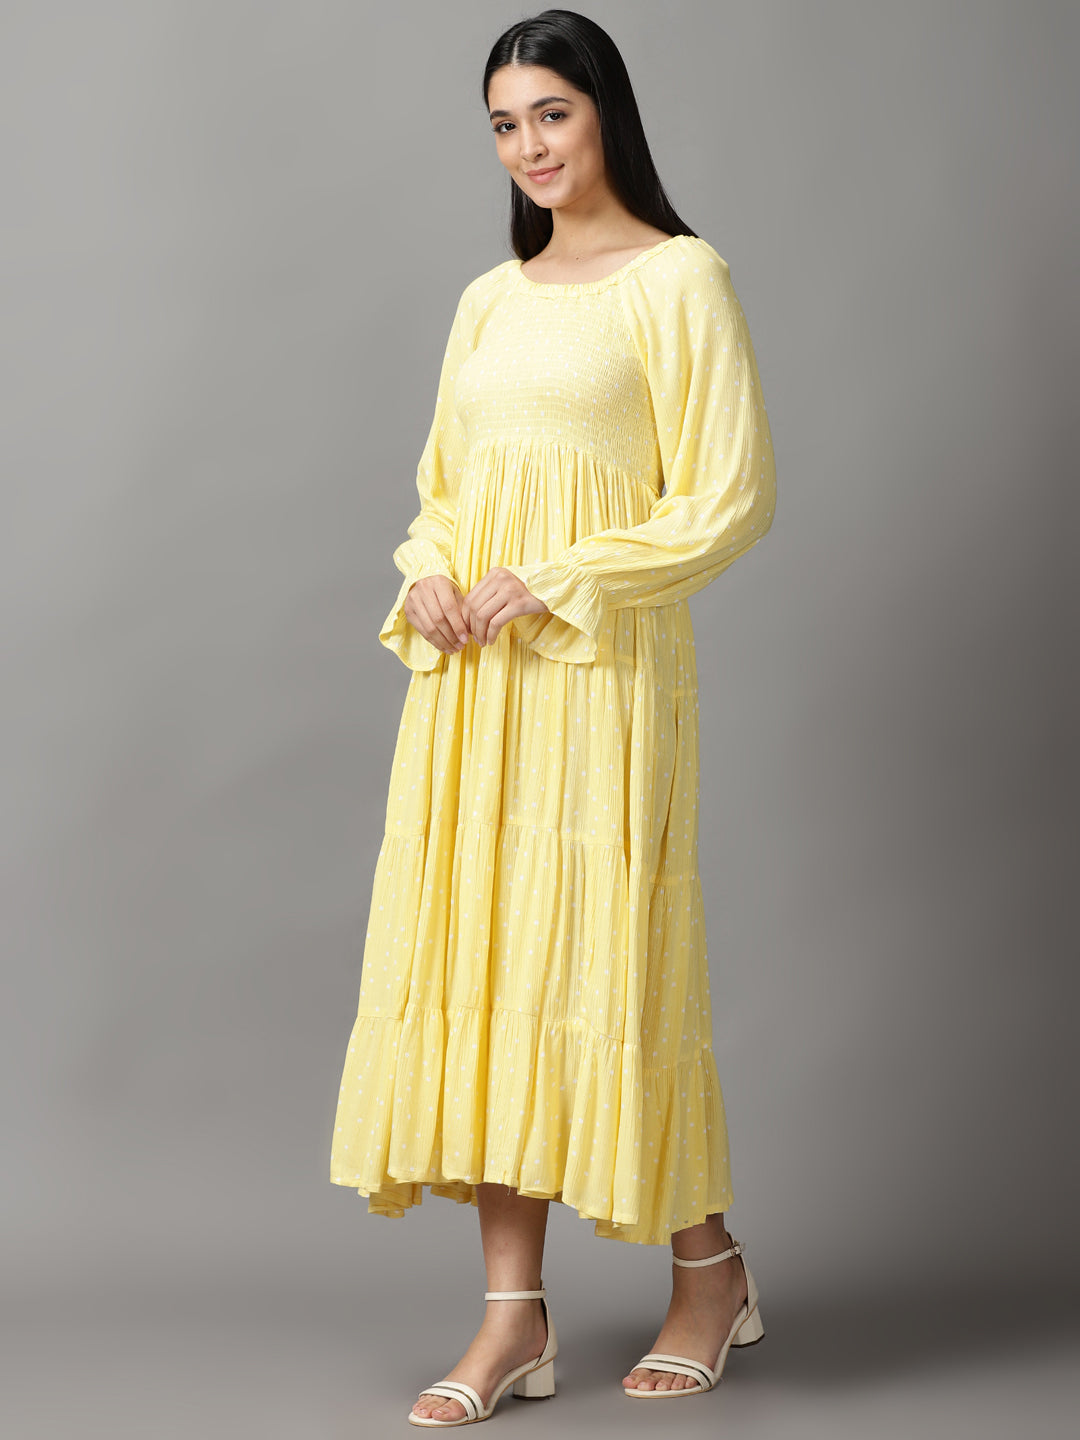 Women's Yellow Polka Dots Fit and Flare Dress